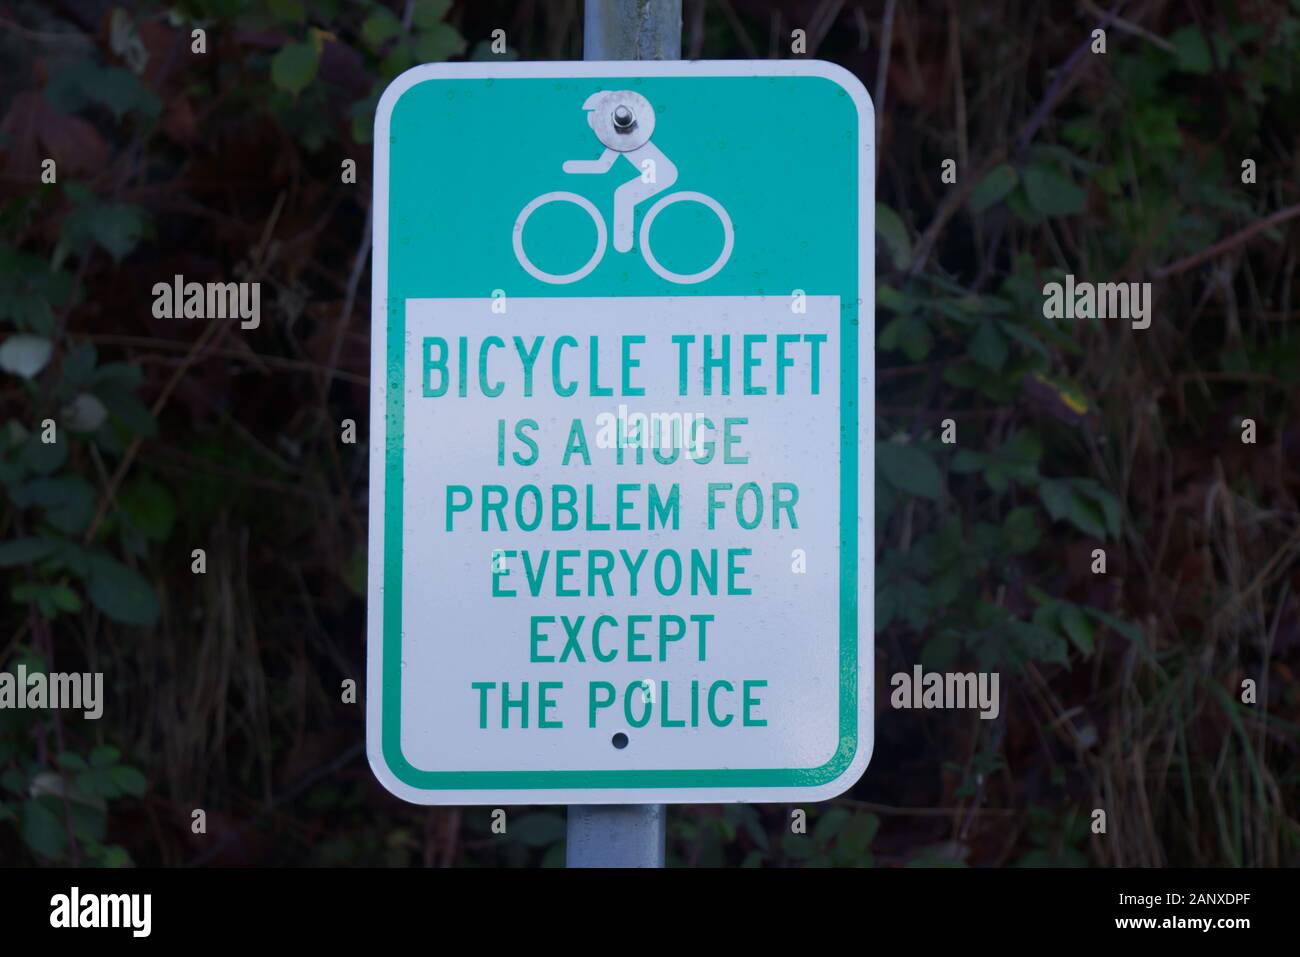 A View of green road sign with bushes in the backgroung in Vancouver. 'Bicycle theft is a huge Problem for everyone except the police'. Stock Photo